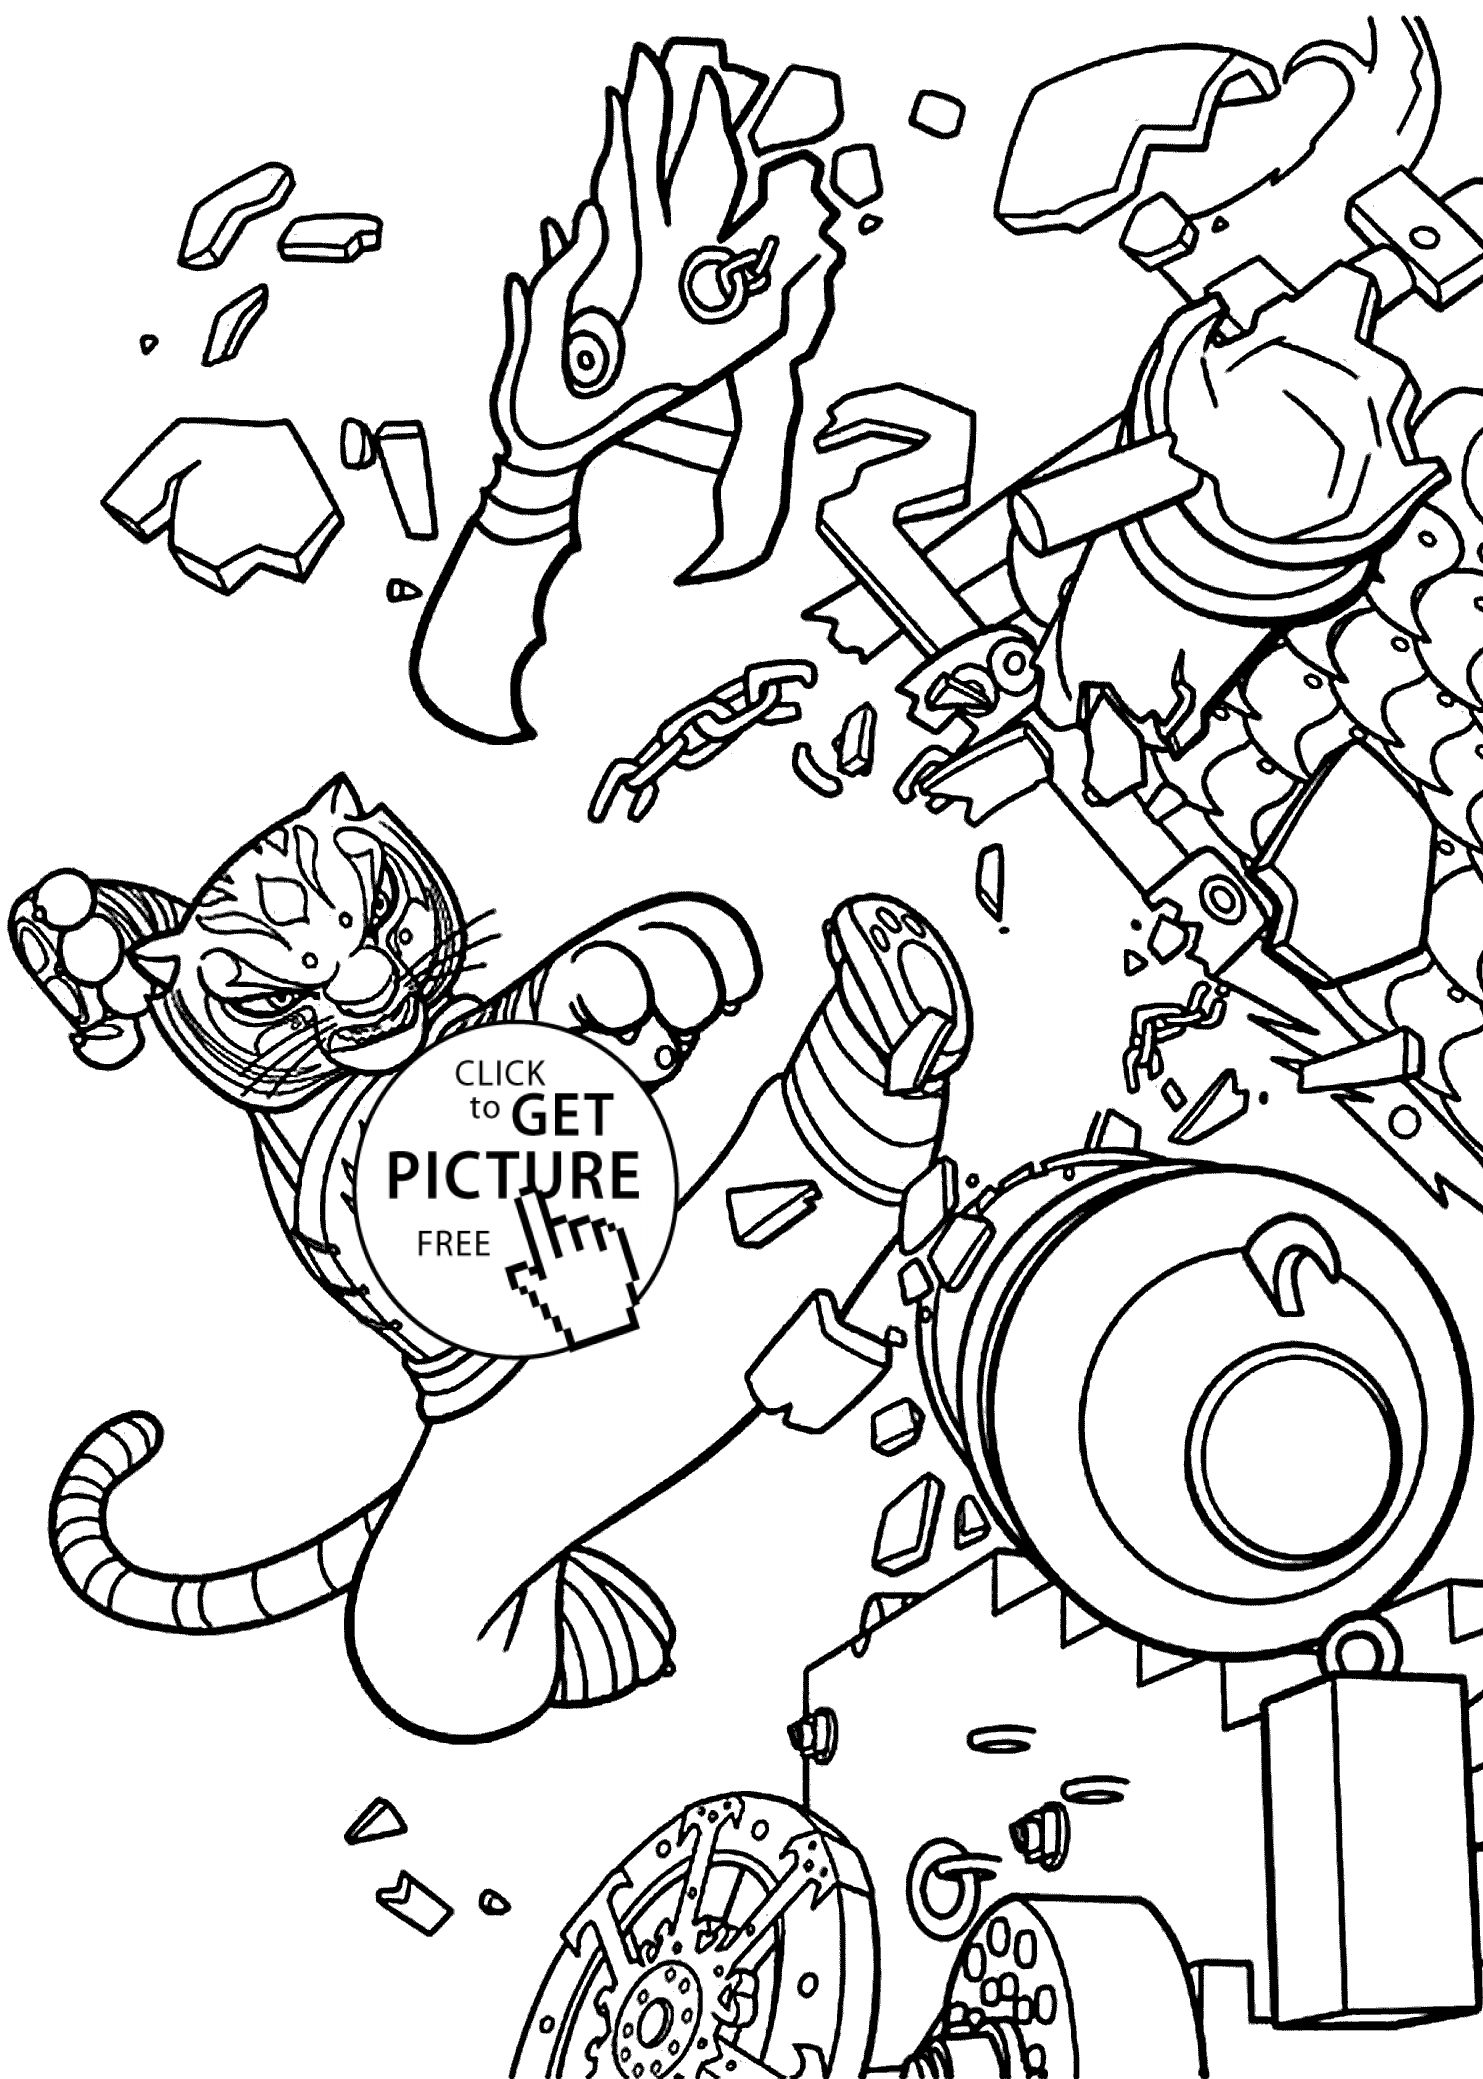 Master Tigress from Kung Fu Panda coloring pages for kids, printable free |  coloing-4kids.com